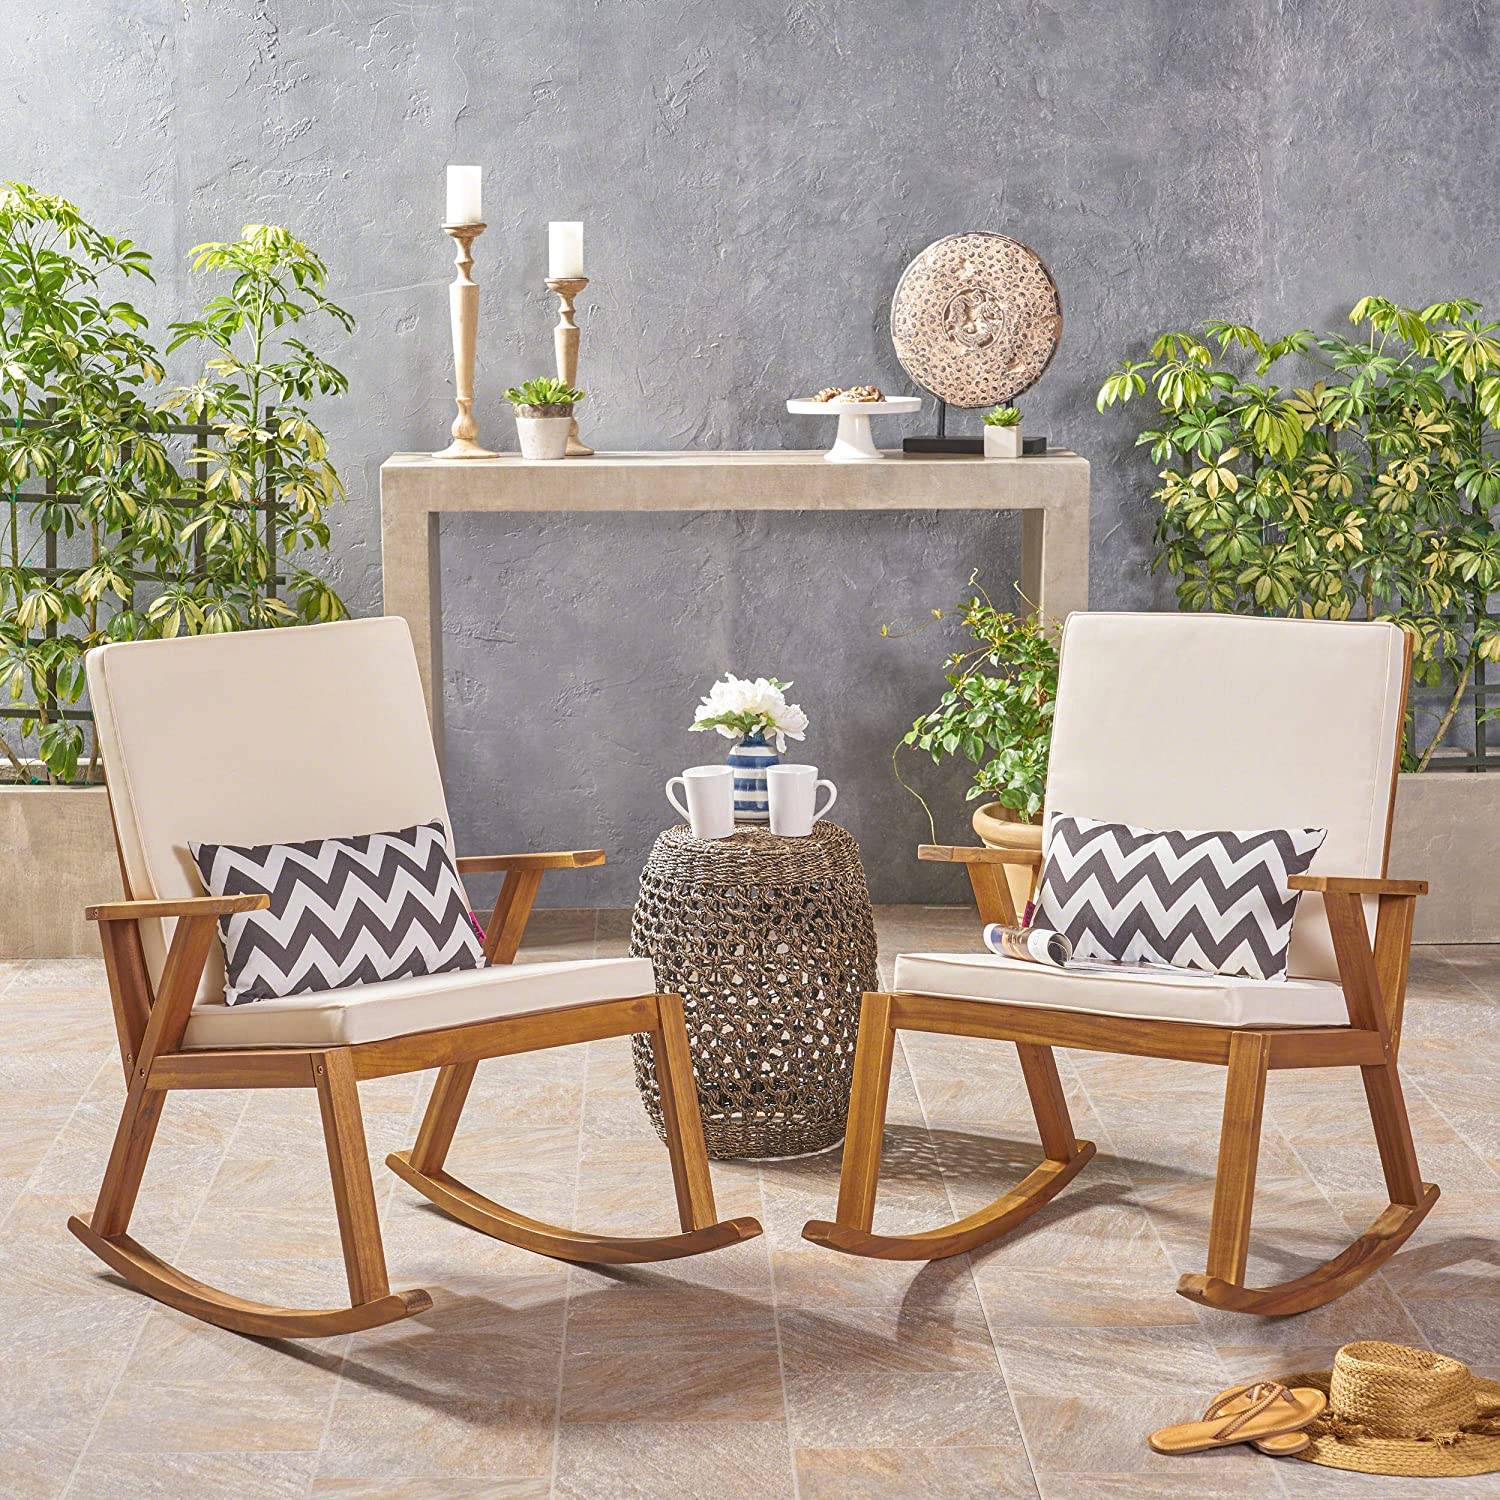 Acacia Wood Patio Seating Rocking Chairs Outdoor Furniture 